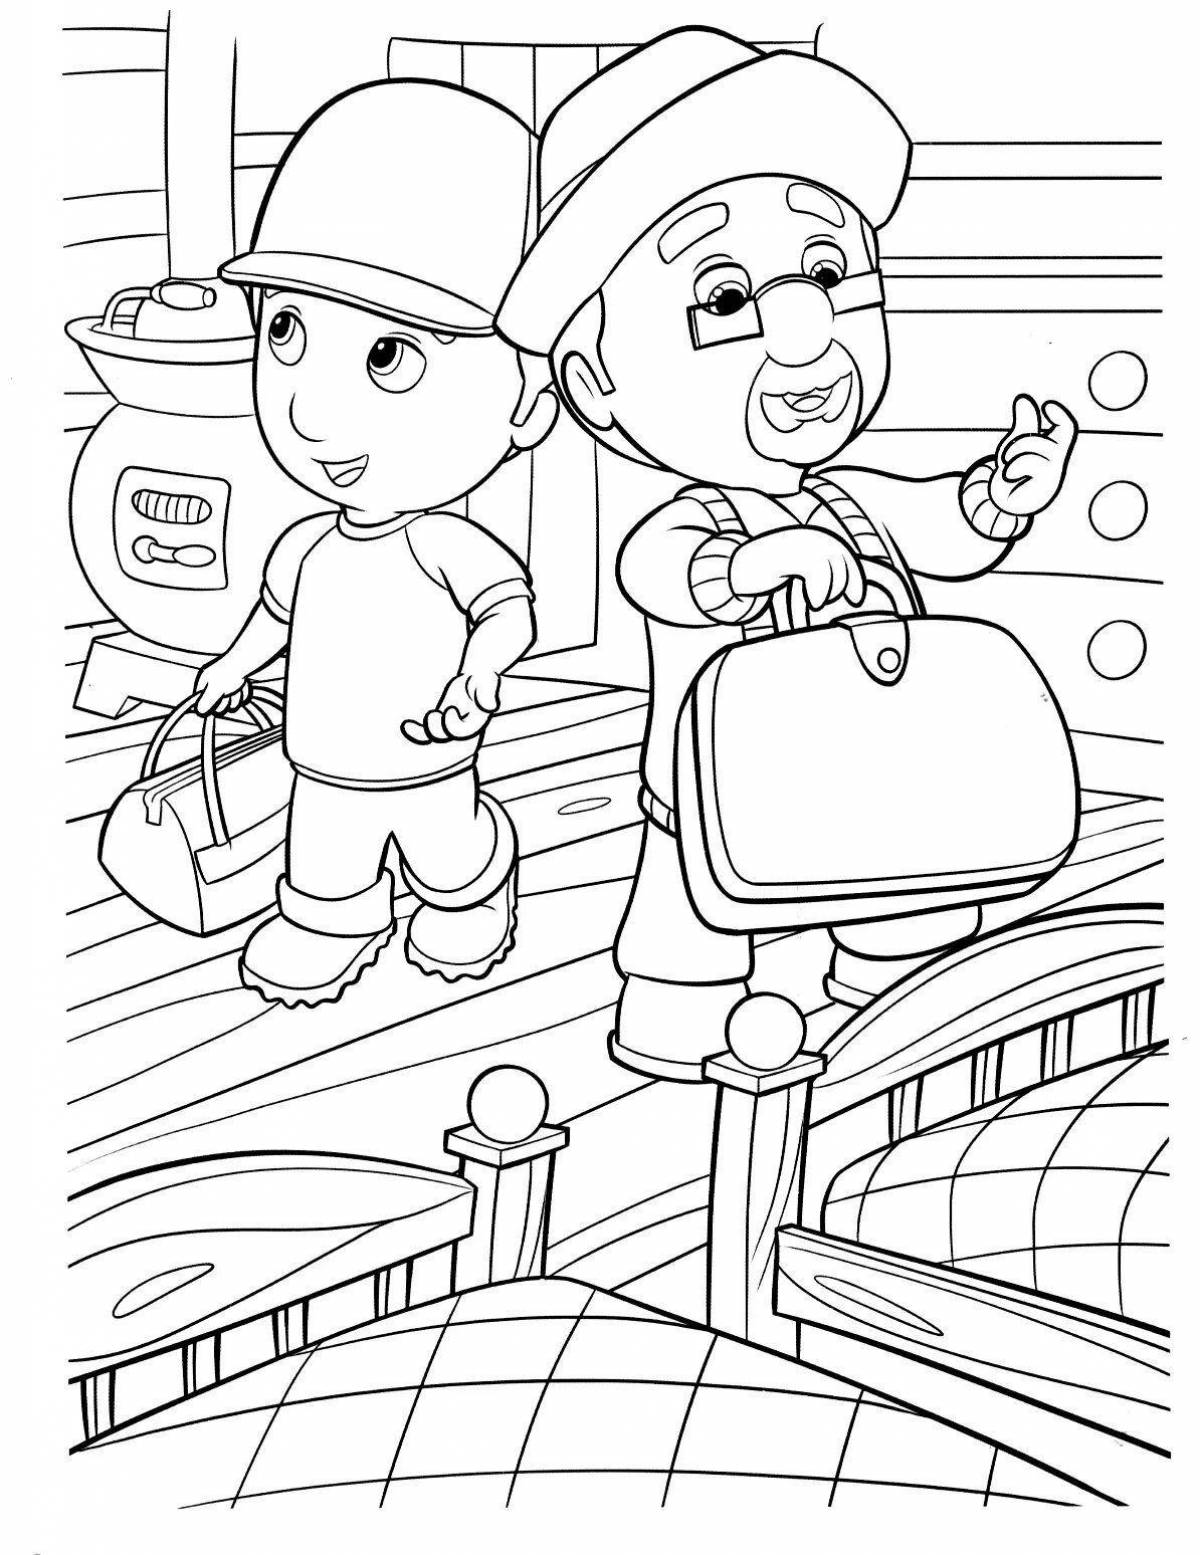 Interesting cog coloring page for kids